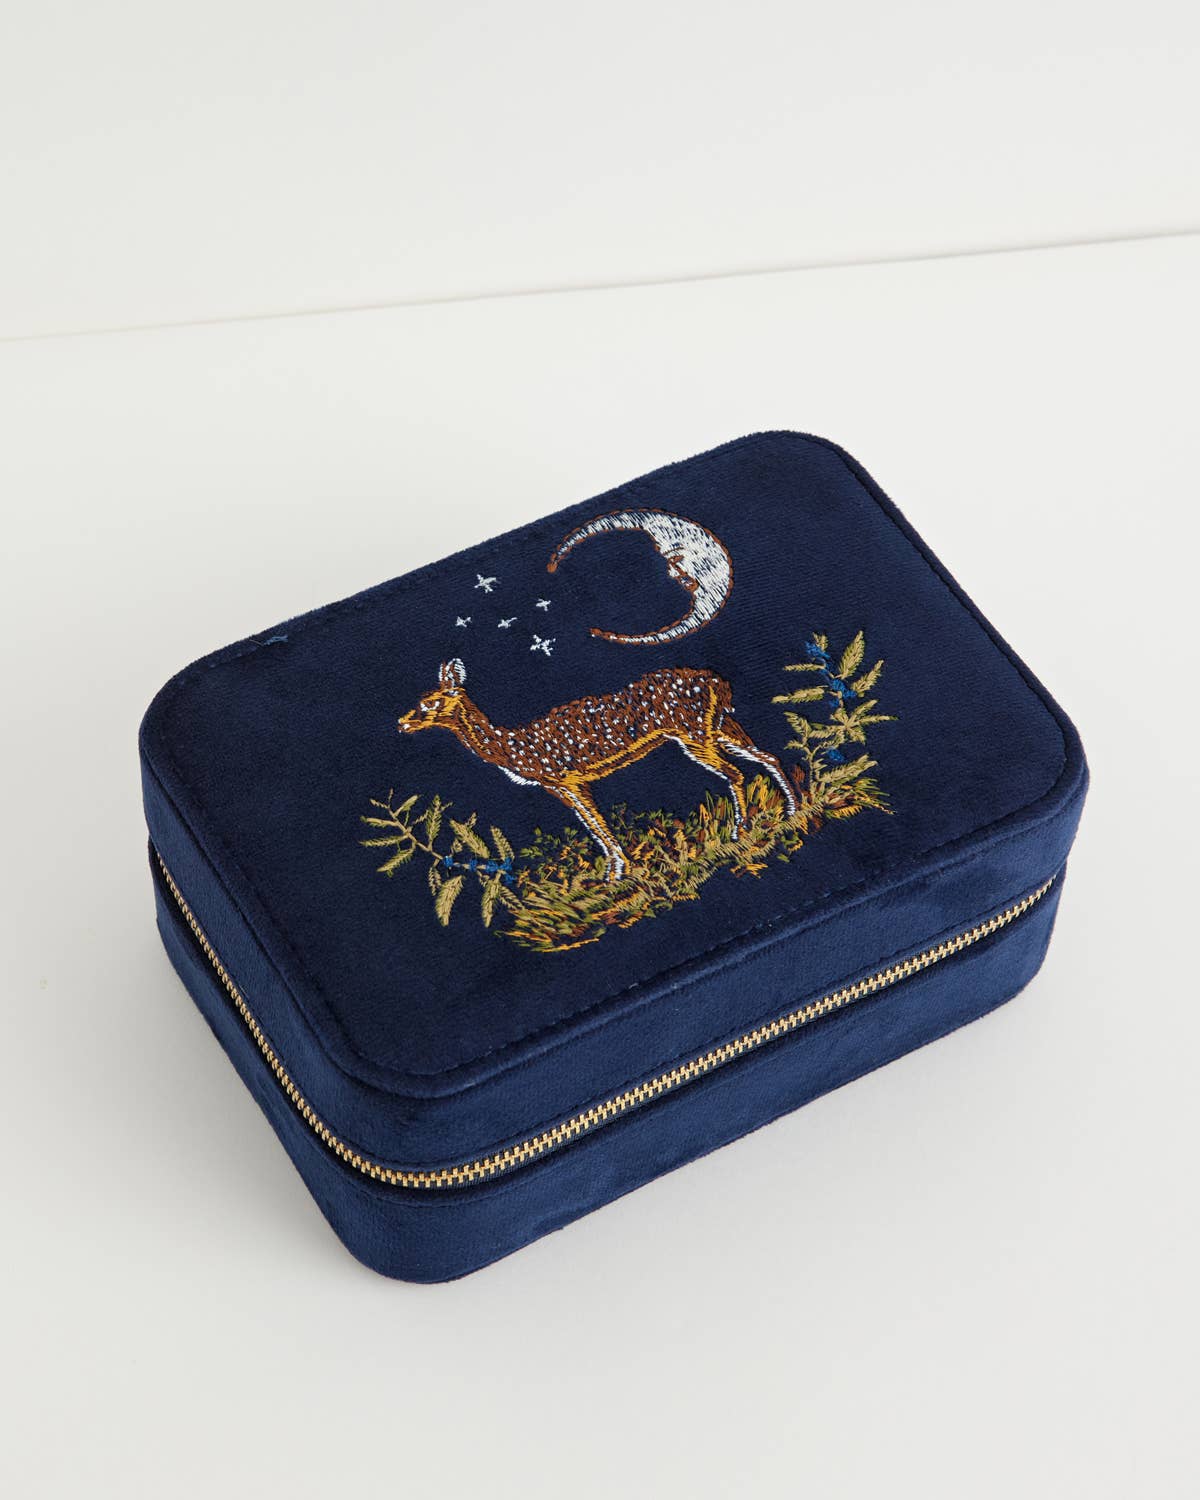 Deer and Moon Embroidered Velvet Large Jewellery Box